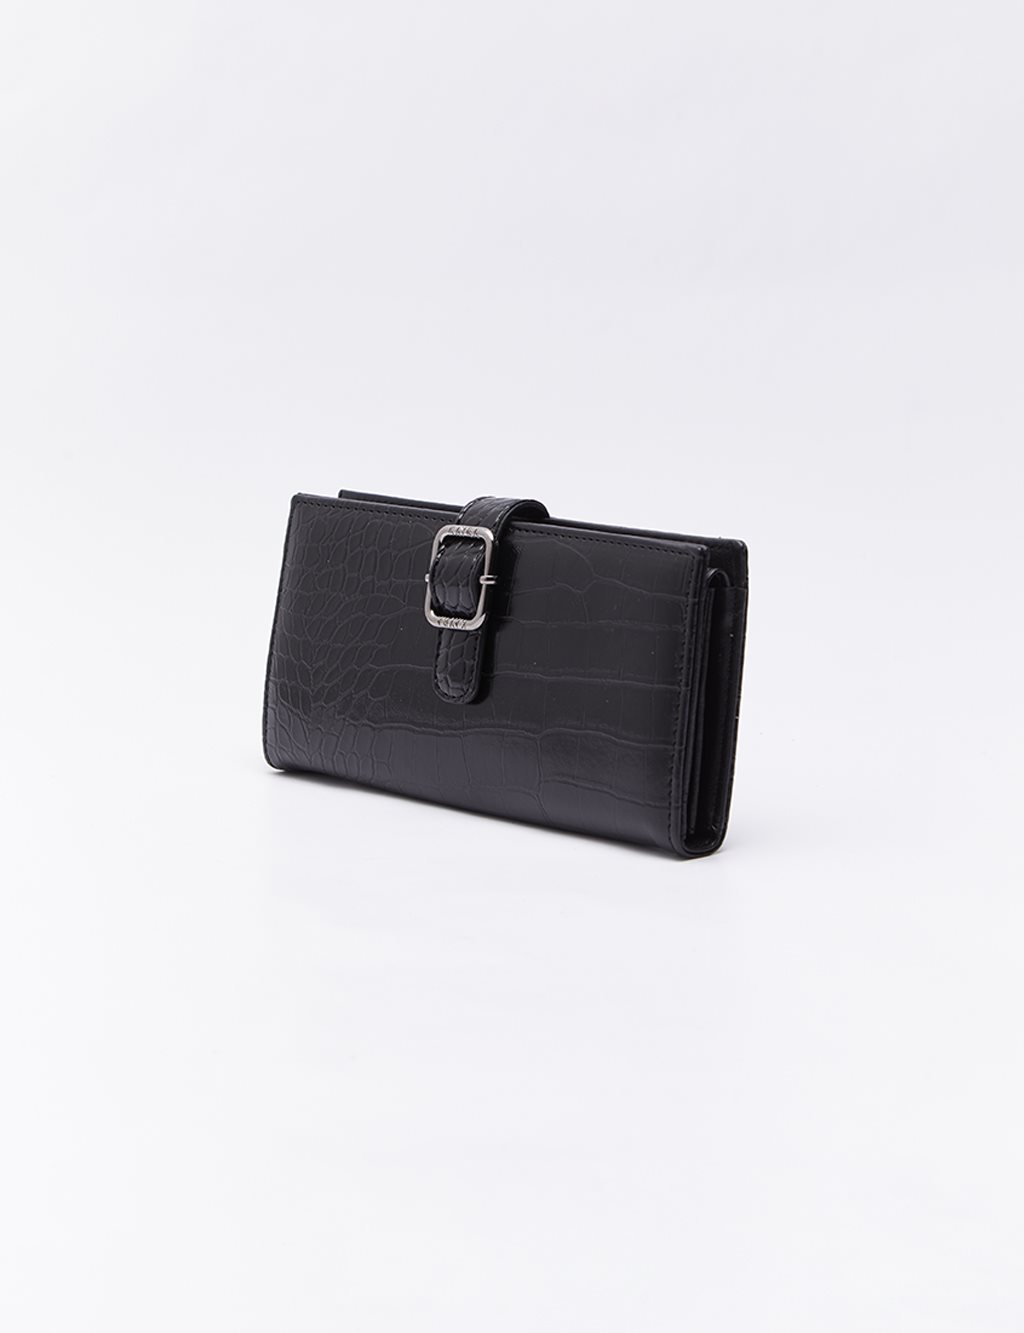 Croco Patterned Patent Leather Wallet Black